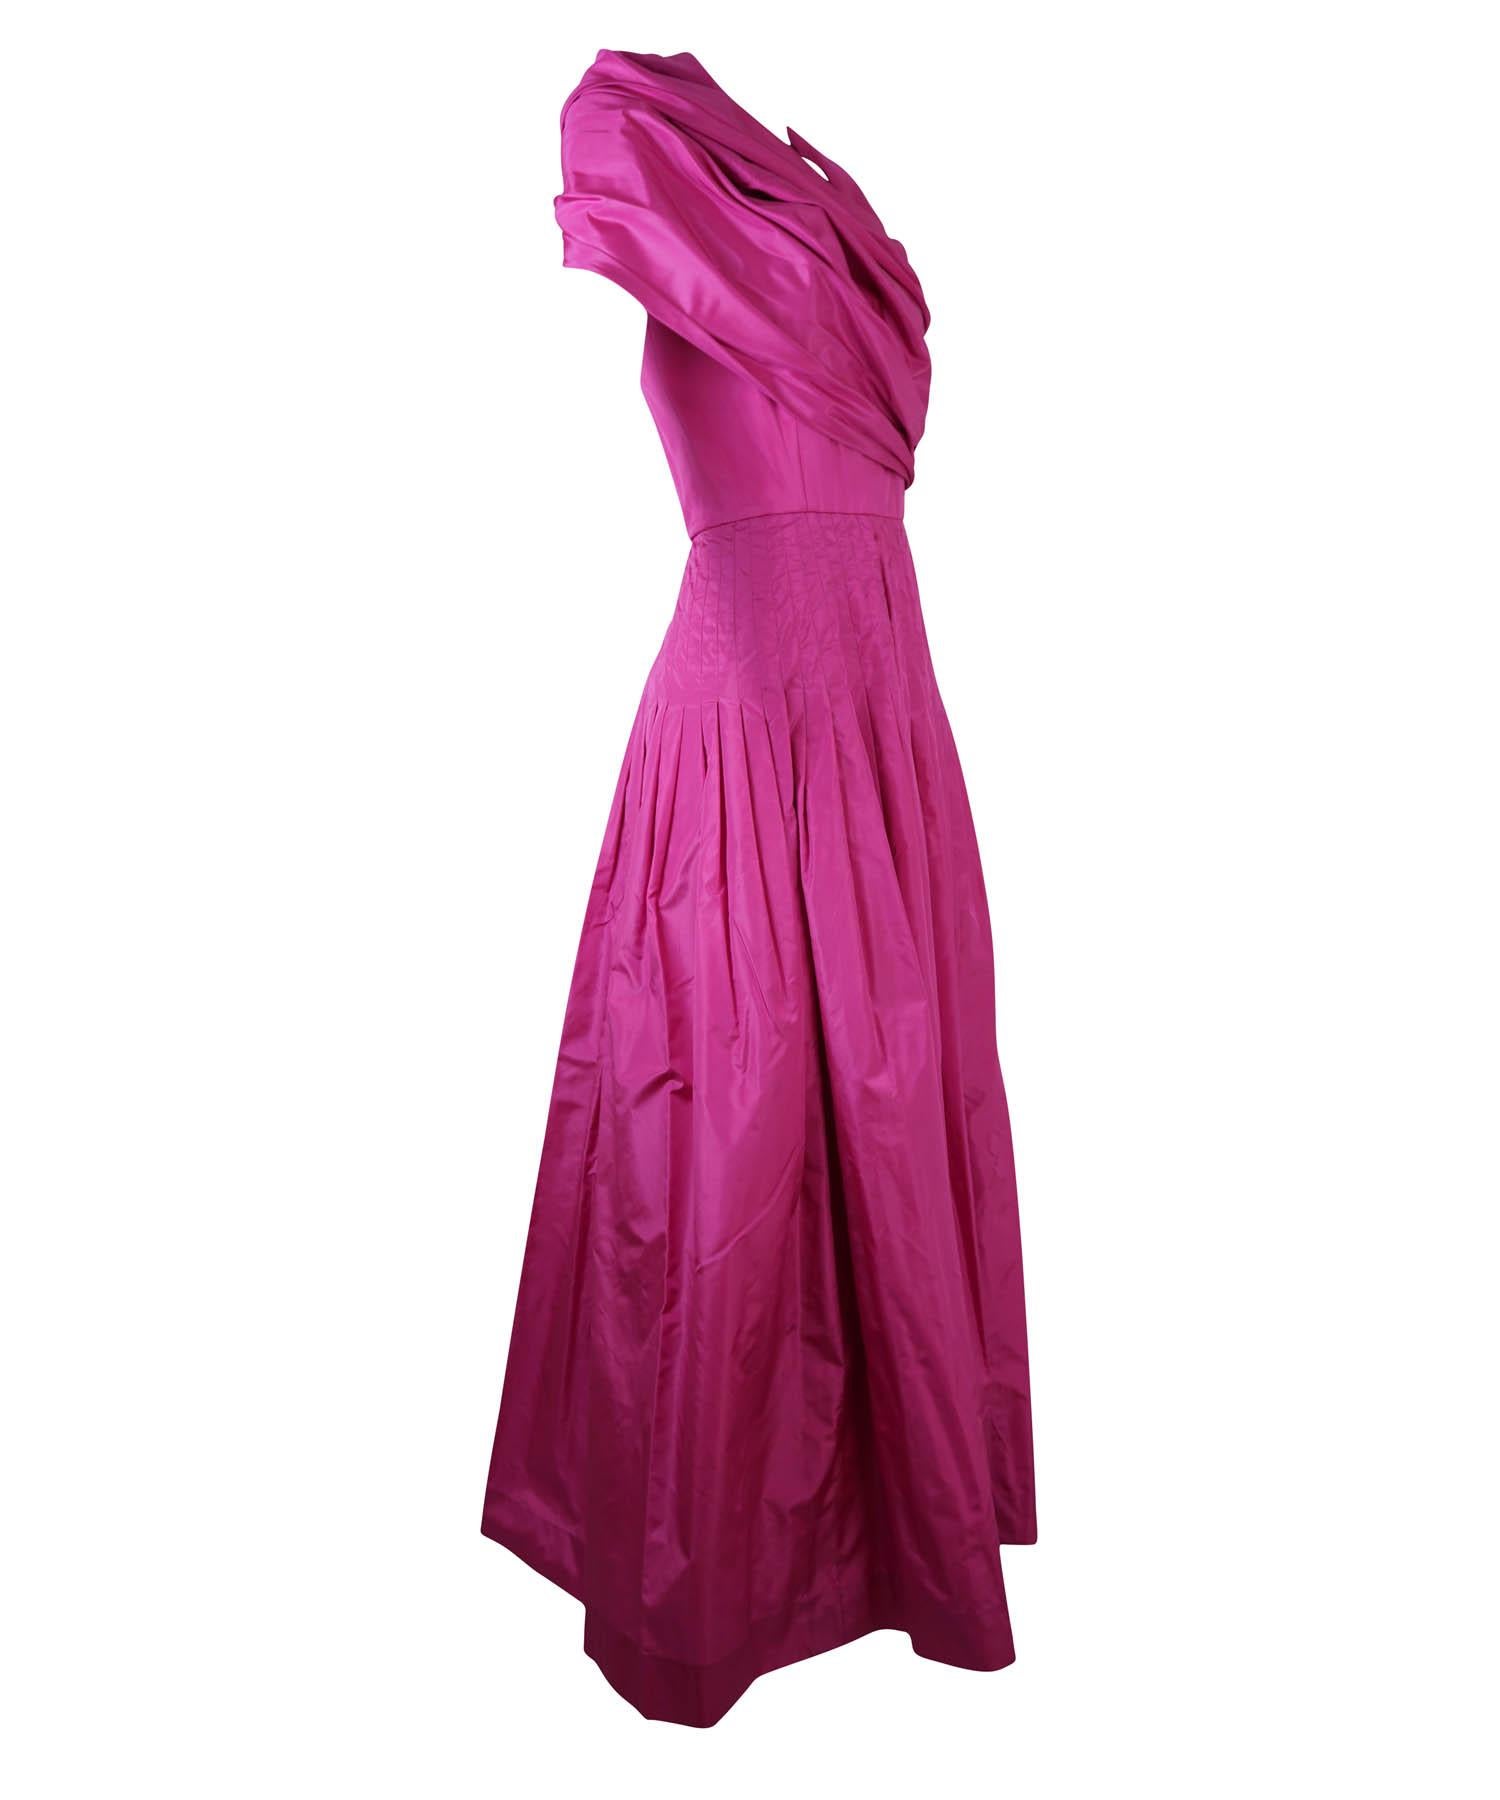 Bill Blass Hot Pink Silk taffeta strapless gown with attached shawl. Vintage from the 1980s. Features back zipper, pleated waist, full skirt and structured strapless bodice with a wrapping shawl that hooks to the front. Self fabric belt ties in bow